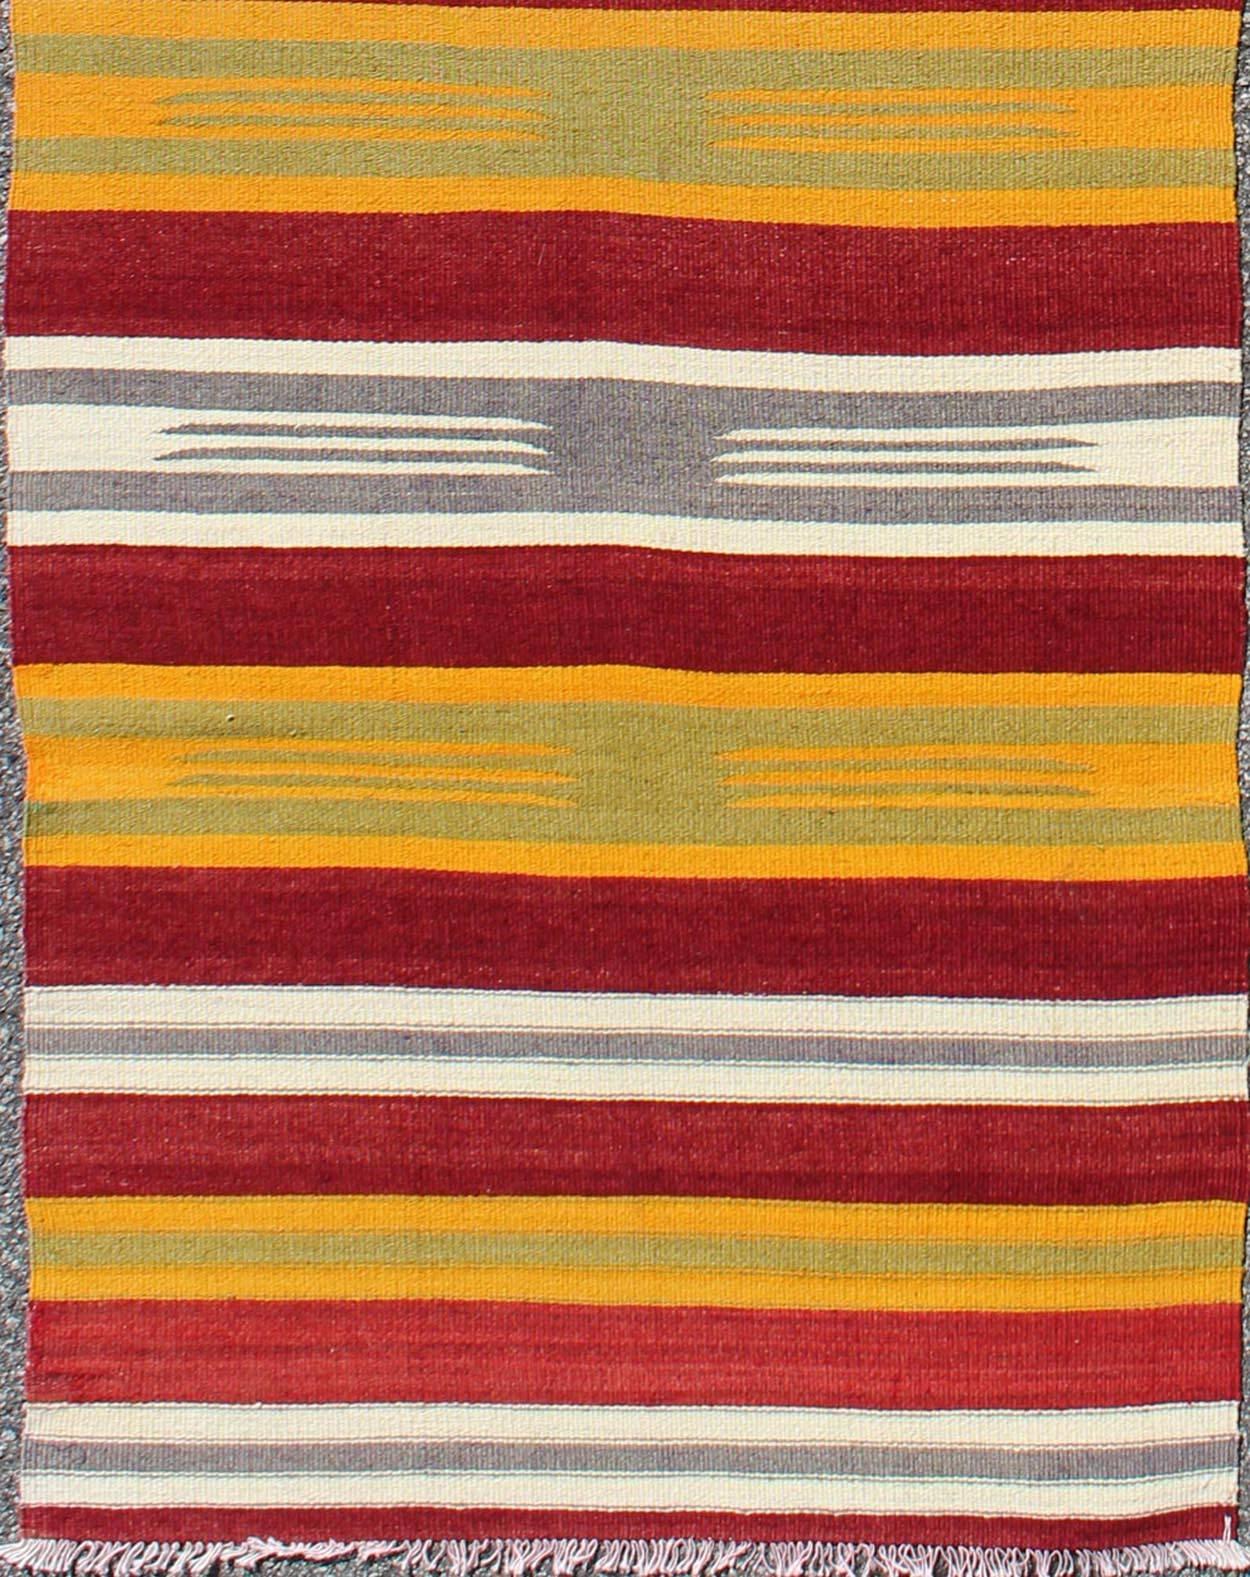 Turkish Kilim runner with stripes in red, green, yellow, ivory and gray, rug ned-146, country of origin / type: Turkey / Kilim, circa mid-20th century

Woven during the mid-20th century in Turkey, this designer Kilim is decorated with a horizontal